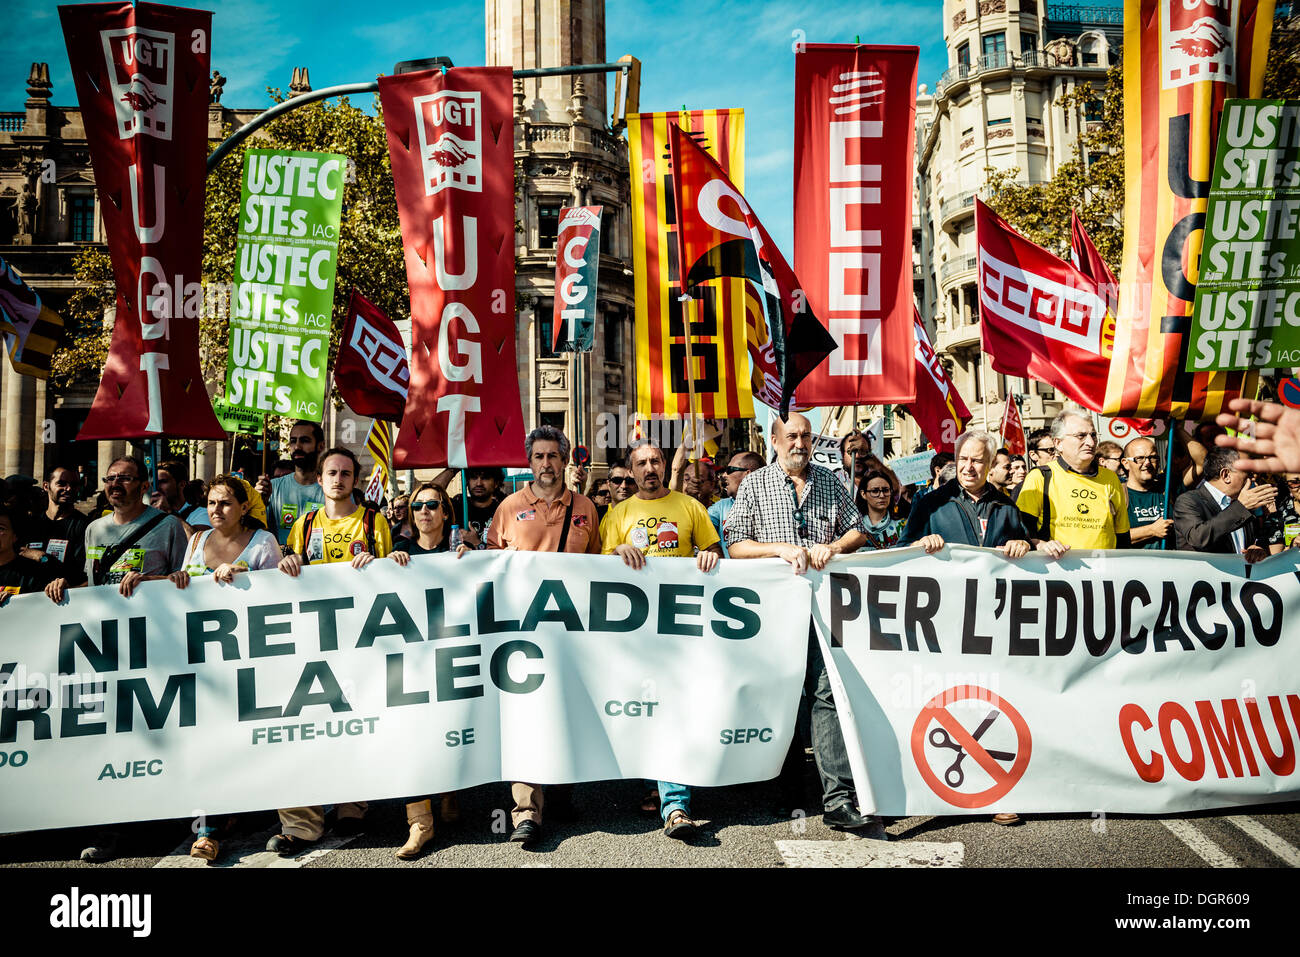 Barcelona, Spain. October 24th, 2013: The major unions are co-organizing the demonstration against austerity measures and the 'law Wert' during a three day long education strike in Barcelona. © matthi/Alamy Live News Stock Photo